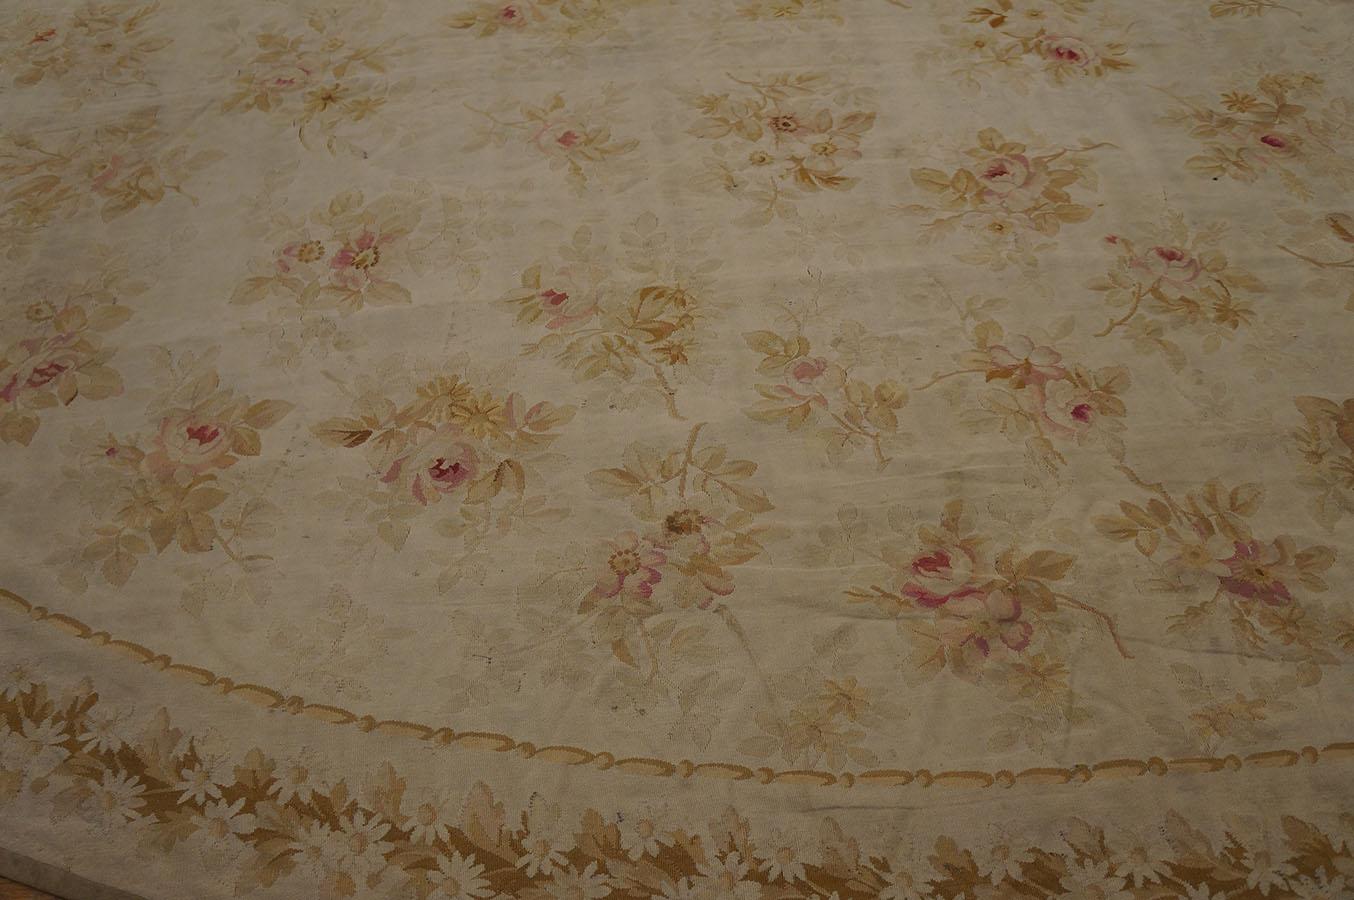 Late 19th Century French Aubusson Carpet ( 8' 4'' x 13' 4'' - 255 x 405 cm )  For Sale 2